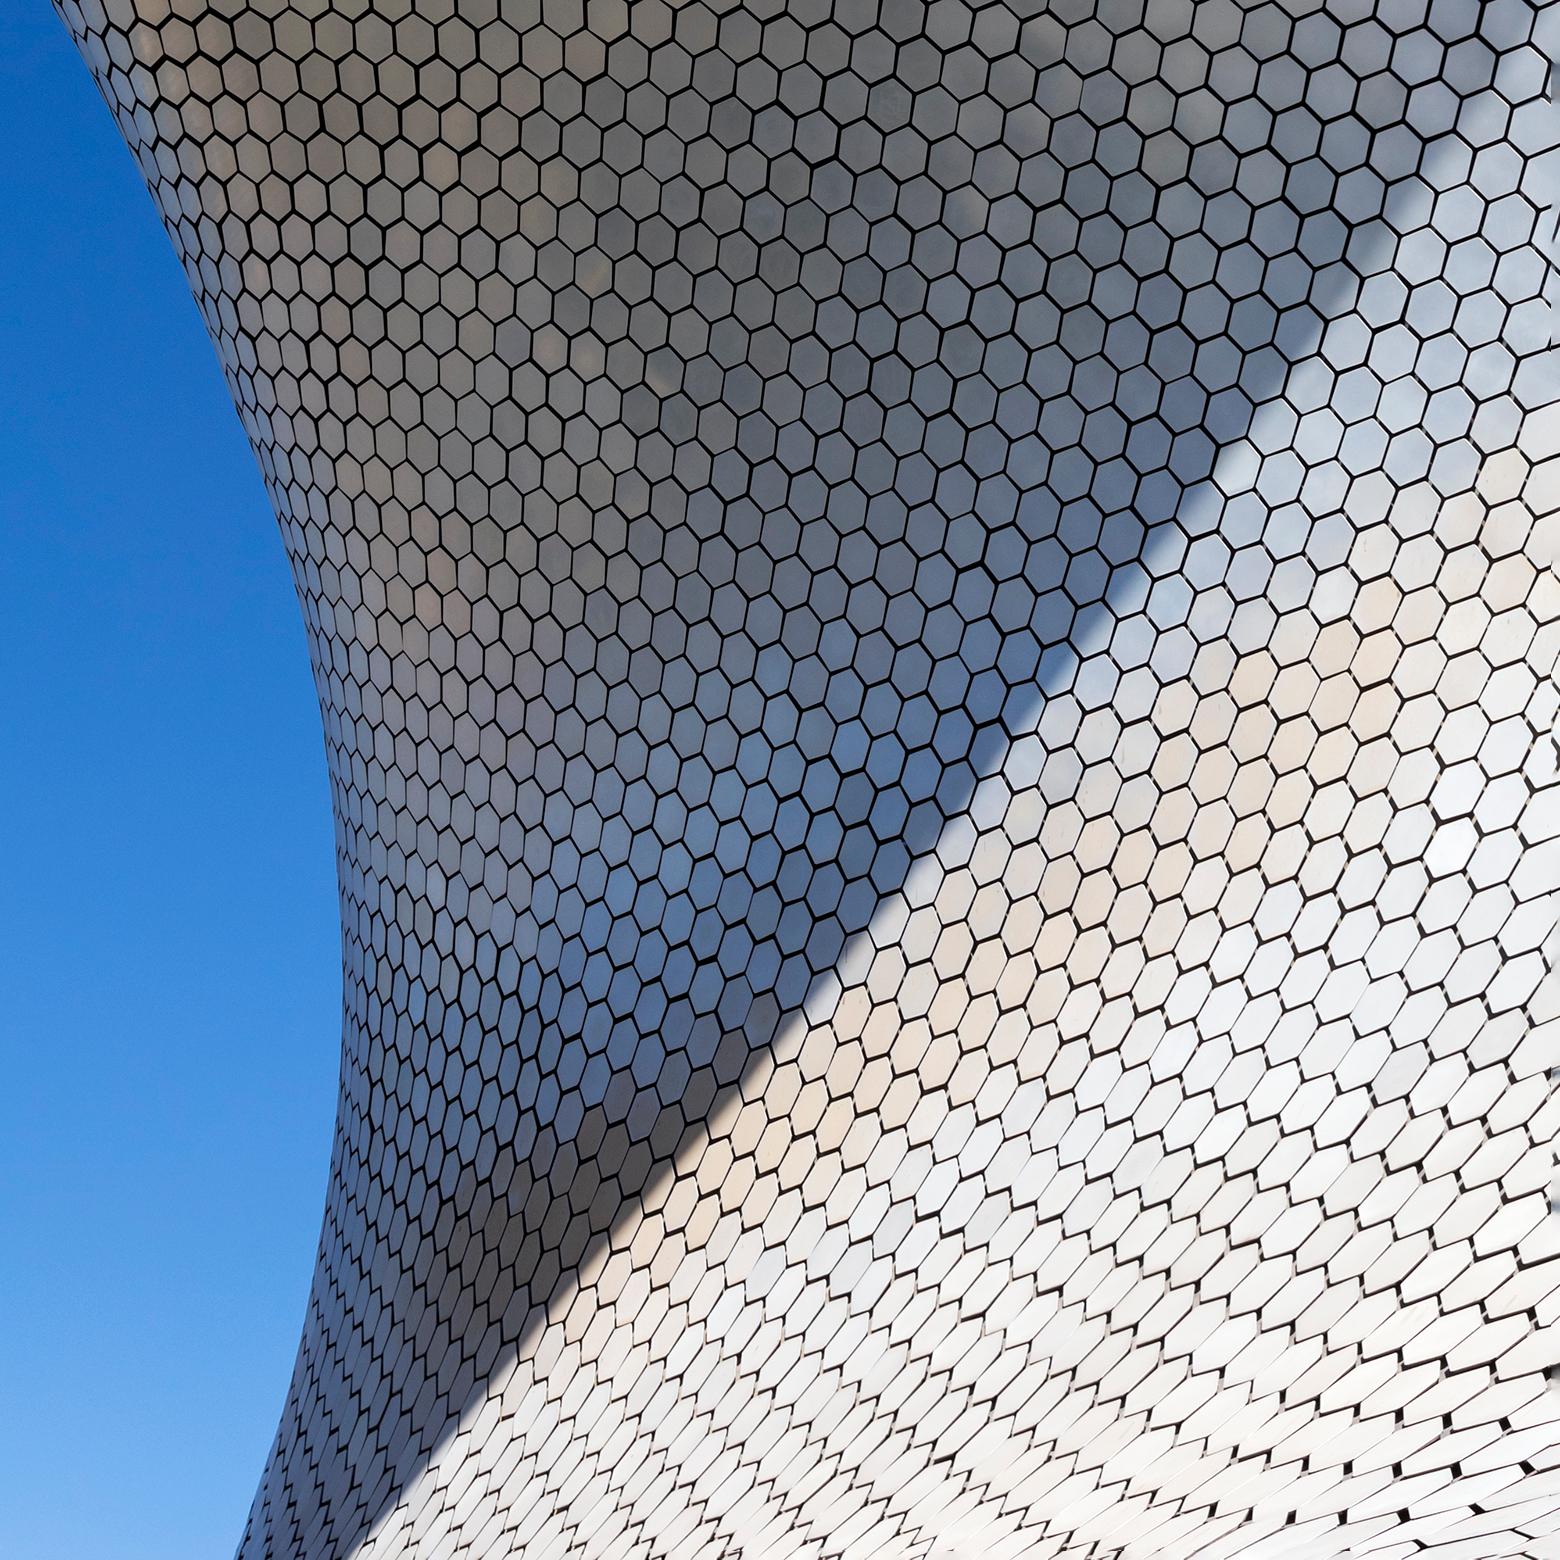 Museo Soumaya, Mexico City. 2020
The Museo Soumaya is a private museum in Mexico City. The founder is Carlo's Slim. Creation Year 2020

Photograph by Cosmo Condina of the exterior of the Museo Soumaya. Wrapped in a skin of mirrored hexagons and